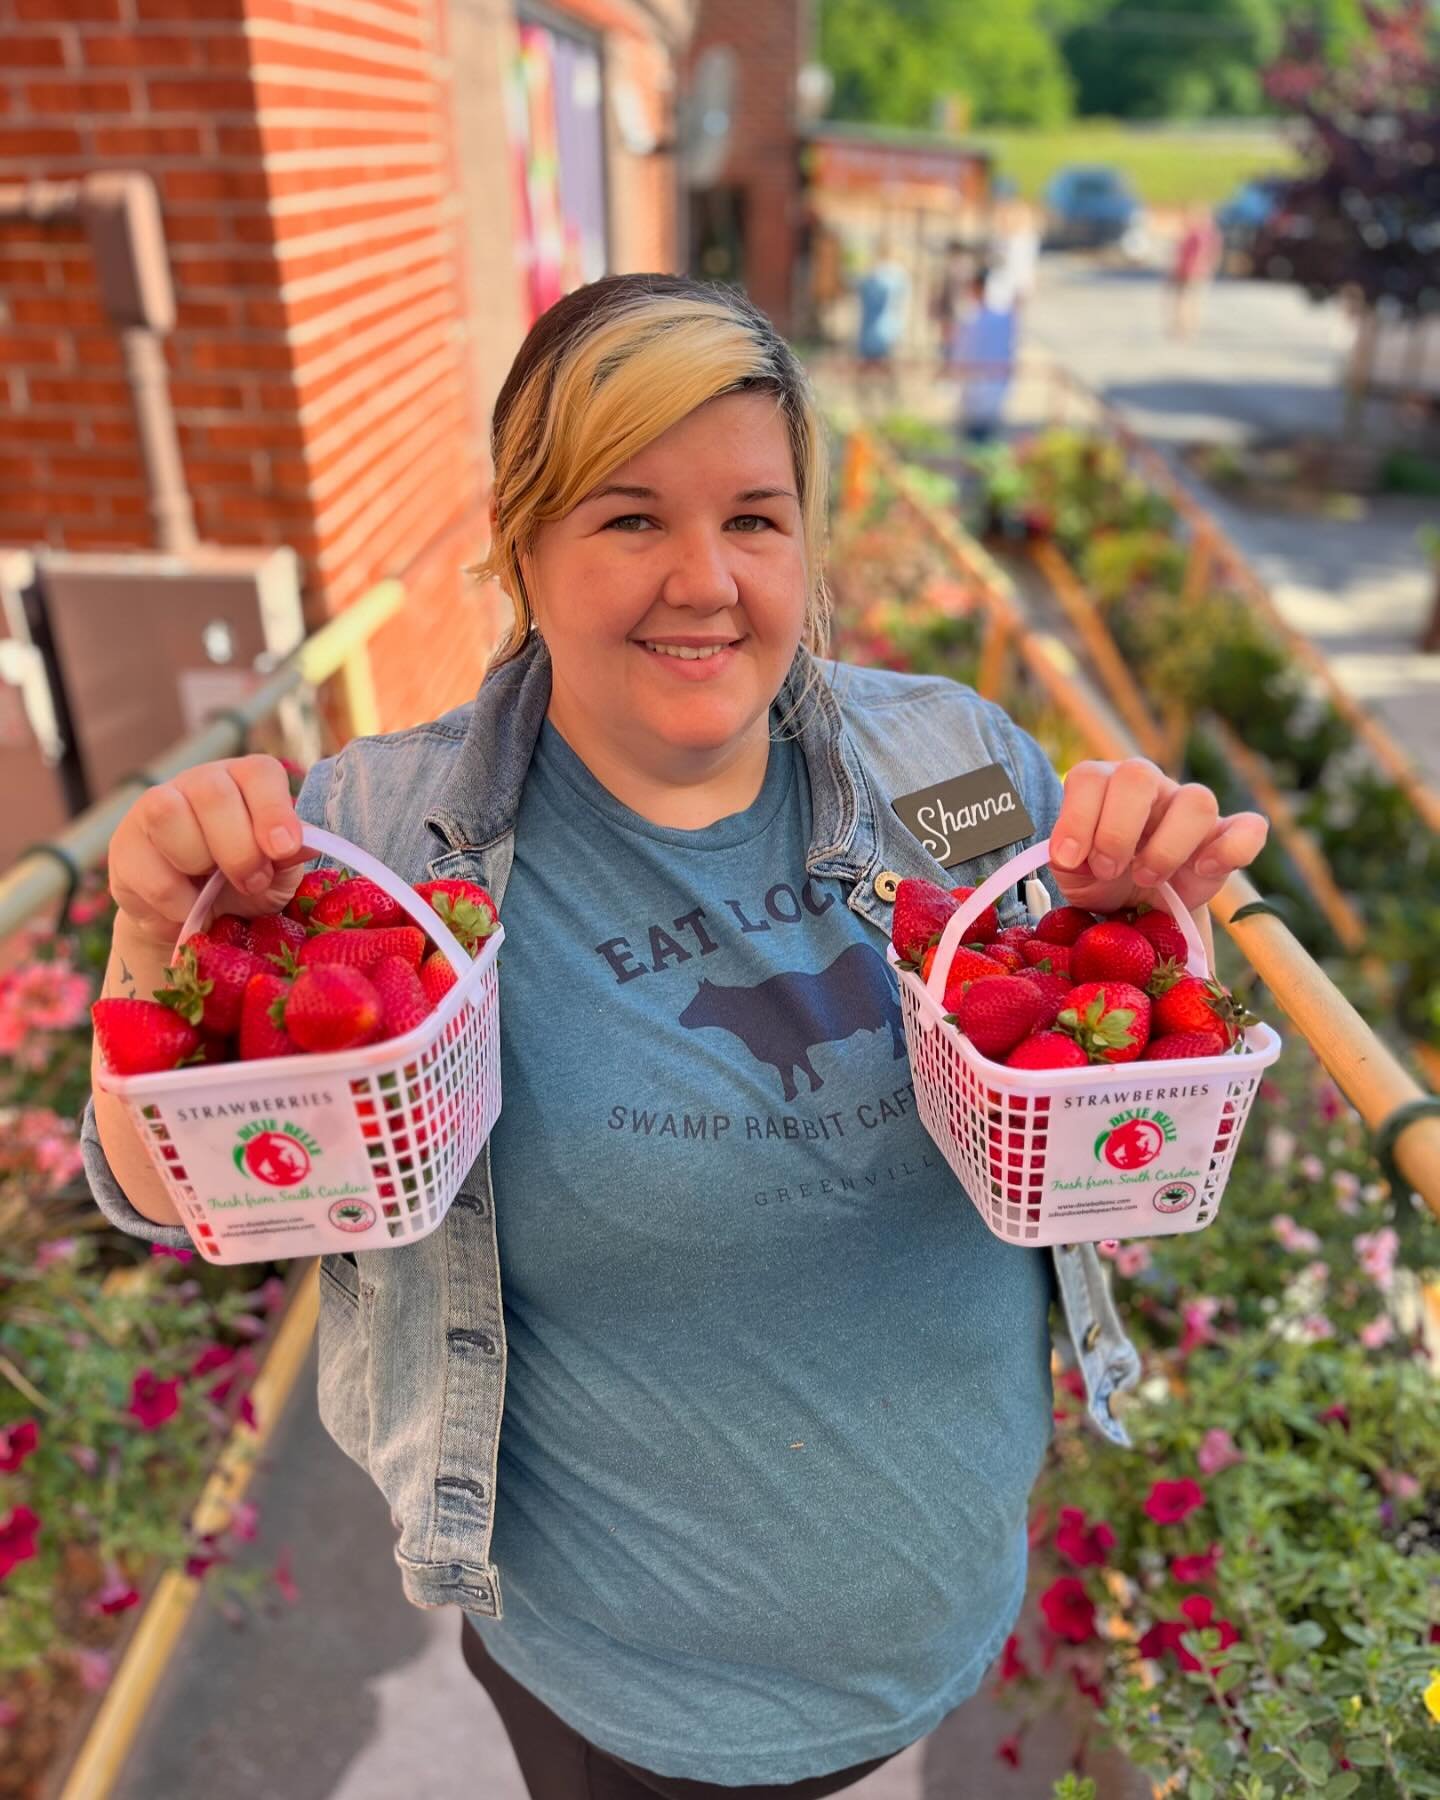 With all the rain we had this week, we were afraid we&rsquo;d have no berries&hellip;. Well our family of farmers have been working hard to pick for you this very special weekend! Come grab your berries today! Mom might want some strawberry shortcake